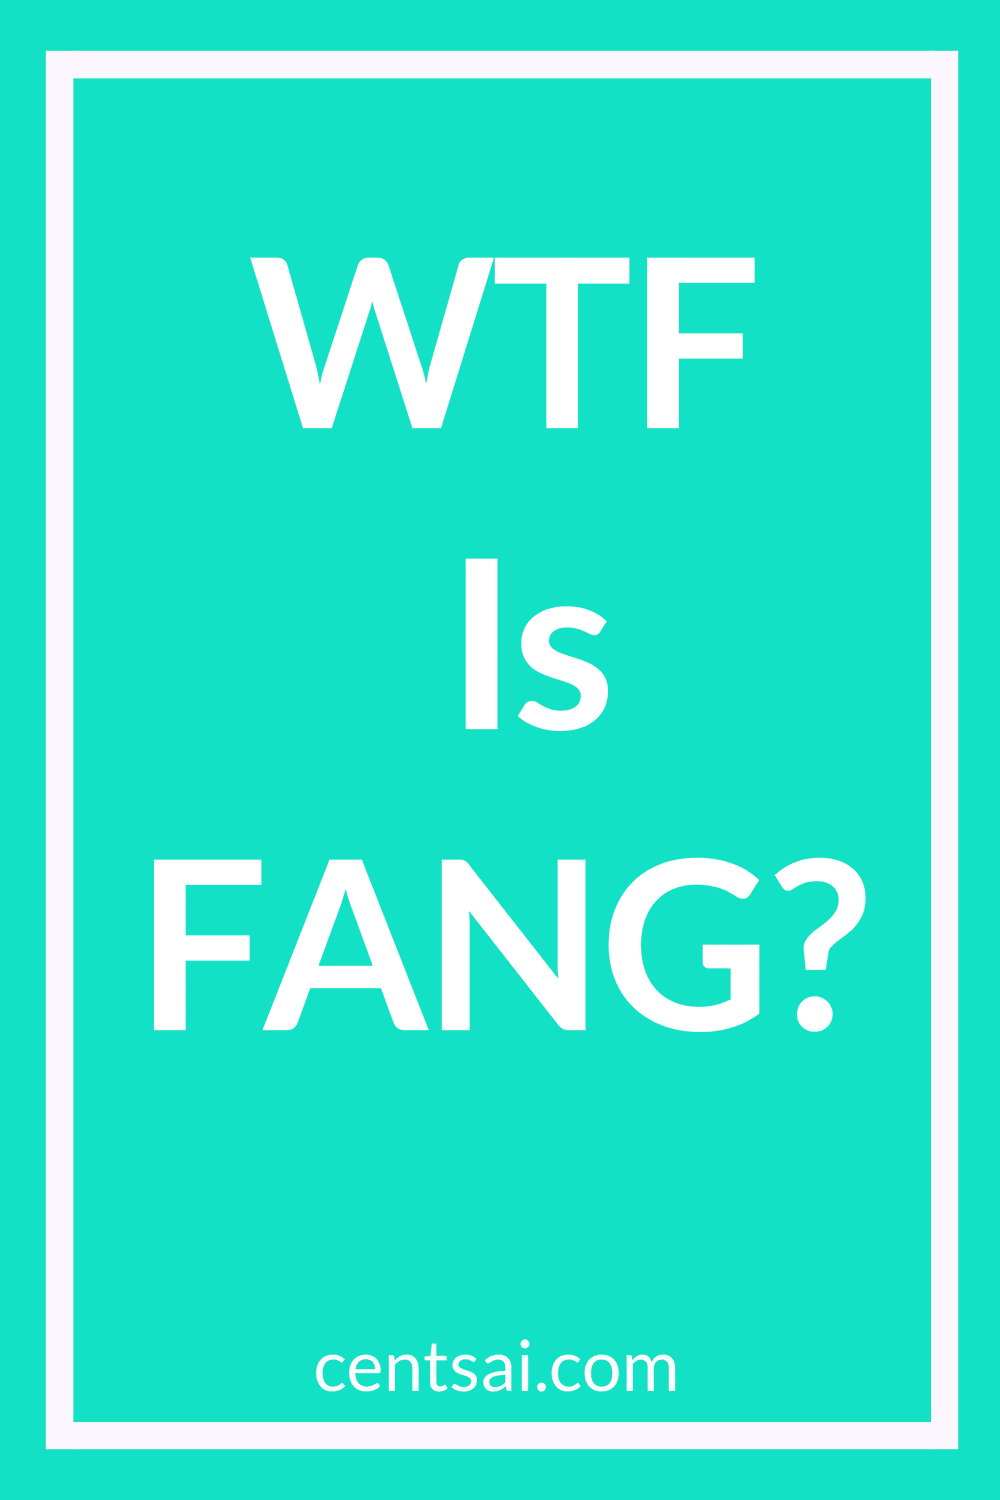 WTF Is FANG? What is FANG? No, it's not a club for vampires. But the investment opportunity excites many tech geeks. Join the club and learn all about it. #investment